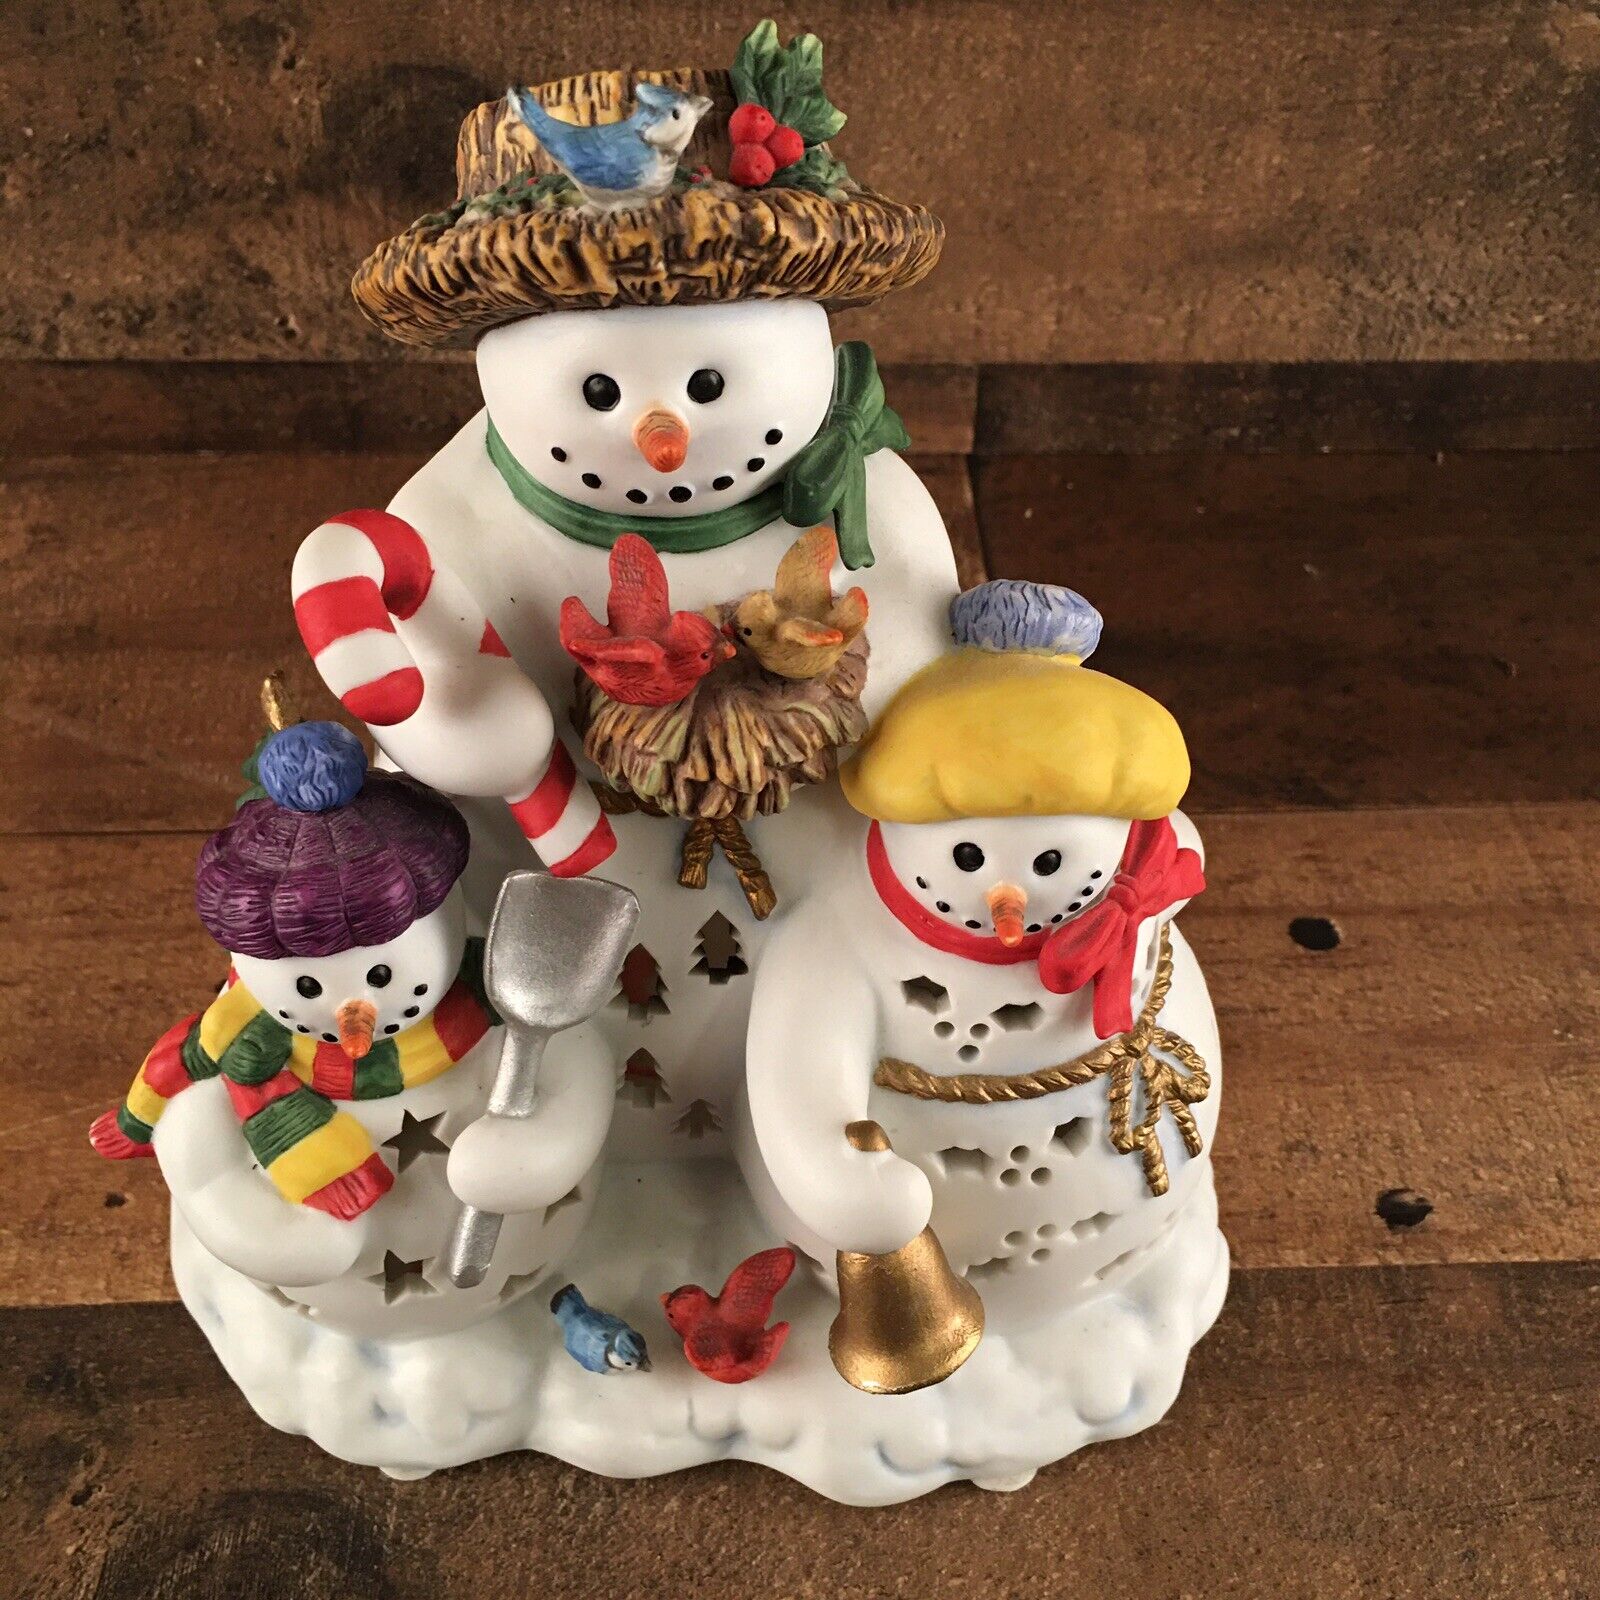 PARTYLITE CANDLE TEALIGHT HOLDER SNOWMAN TRIO SNOWBELL WINTER / CHRISTMAS DECOR